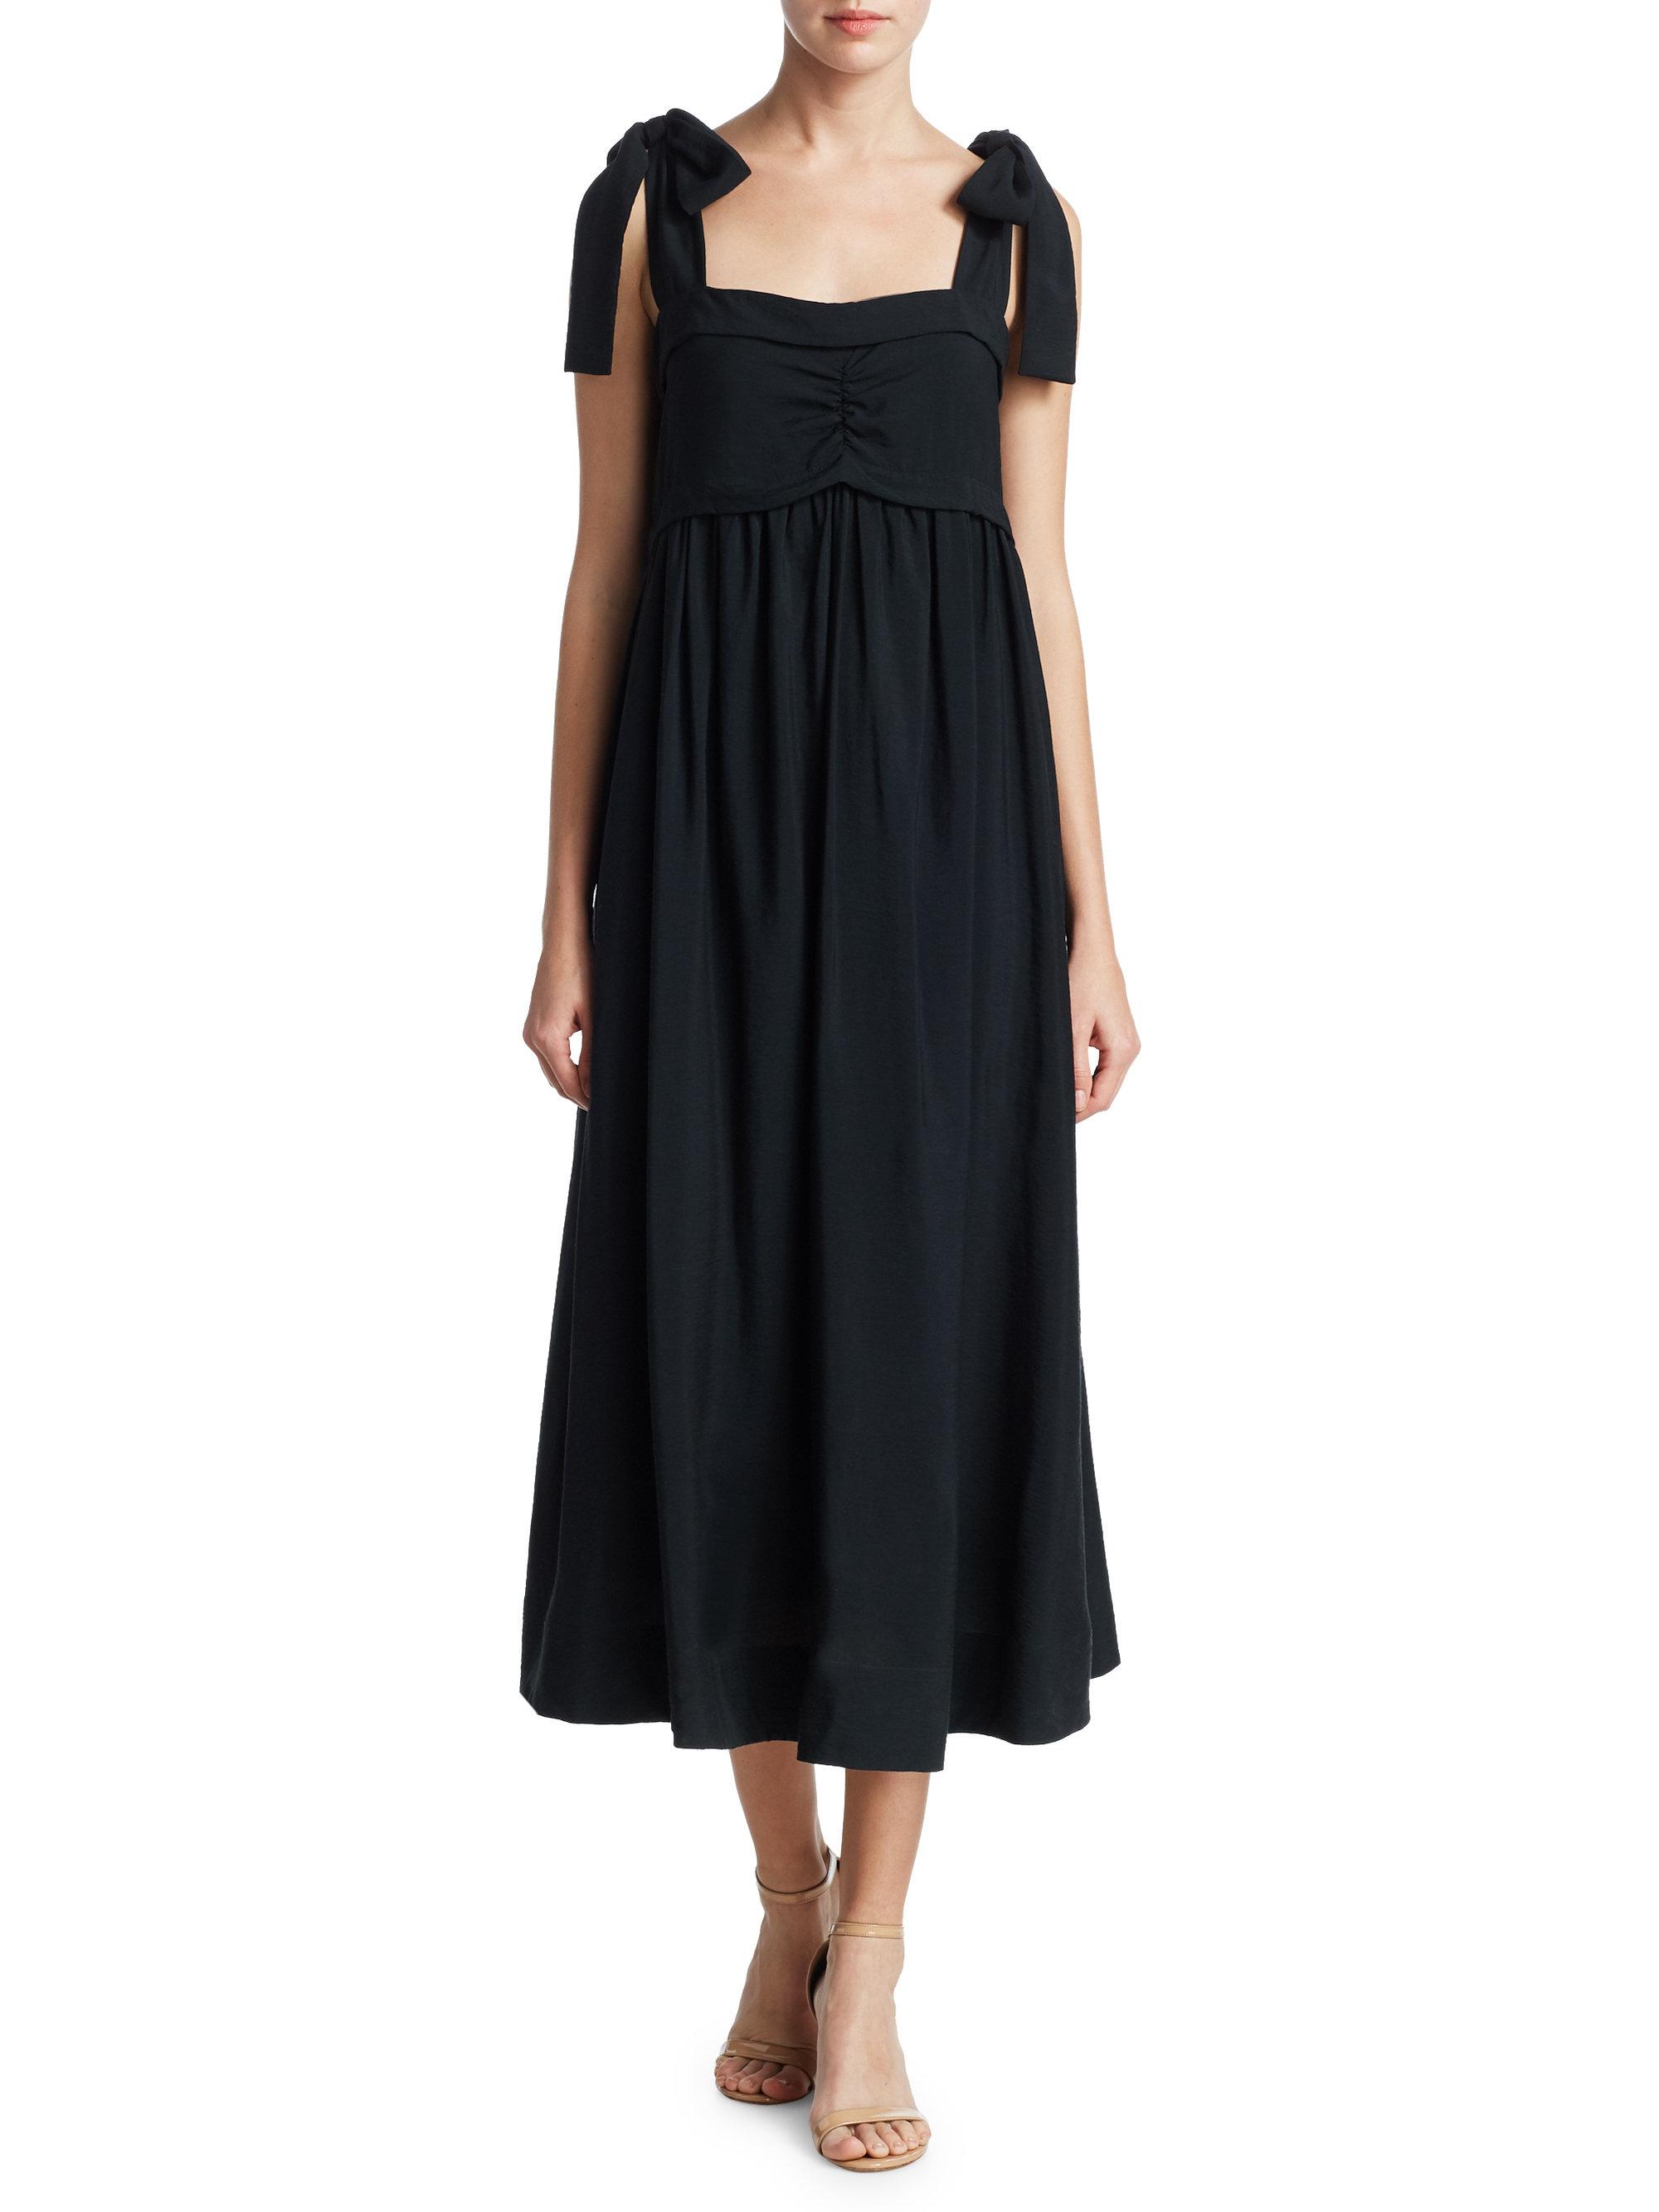 See By Chloé Synthetic Tie Shoulder Maxi Dress in Black - Lyst